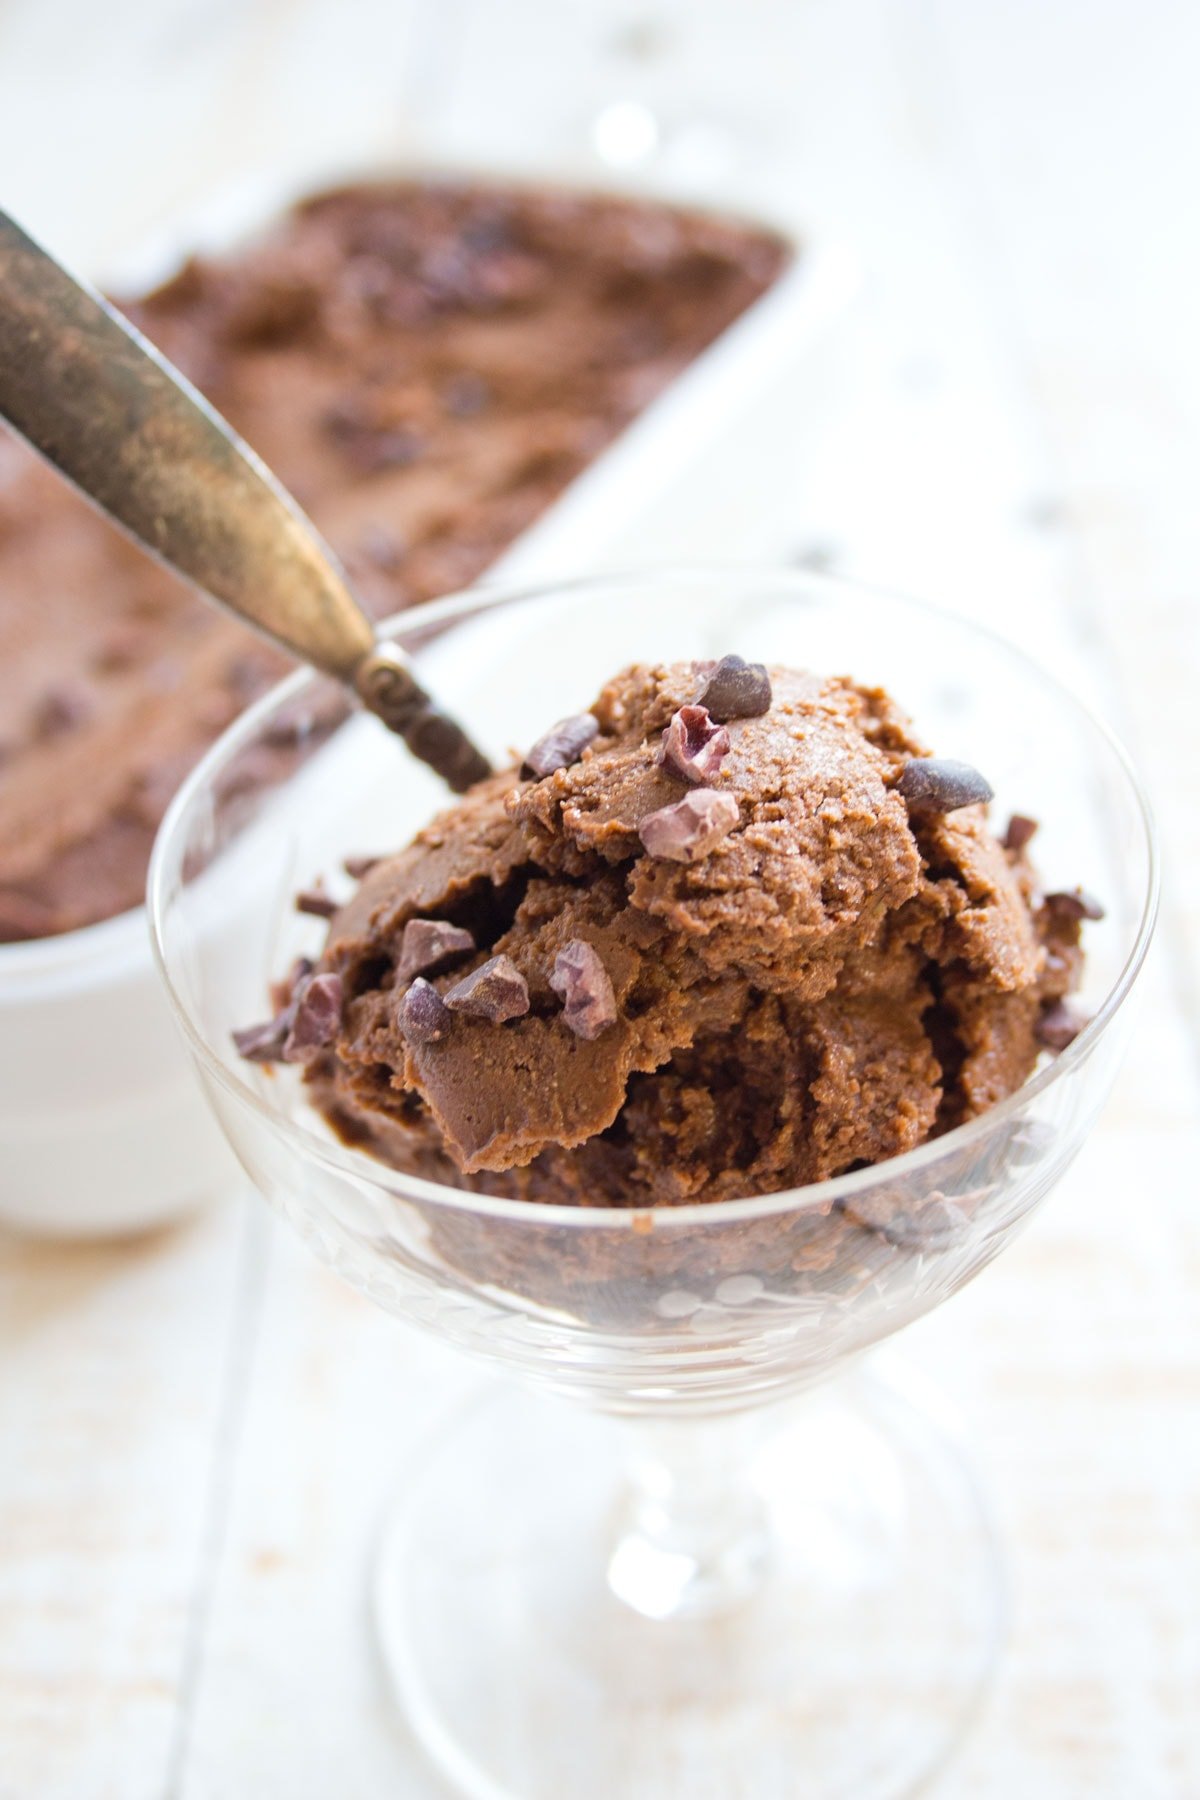 A glass bowl with chocolate ice cream.